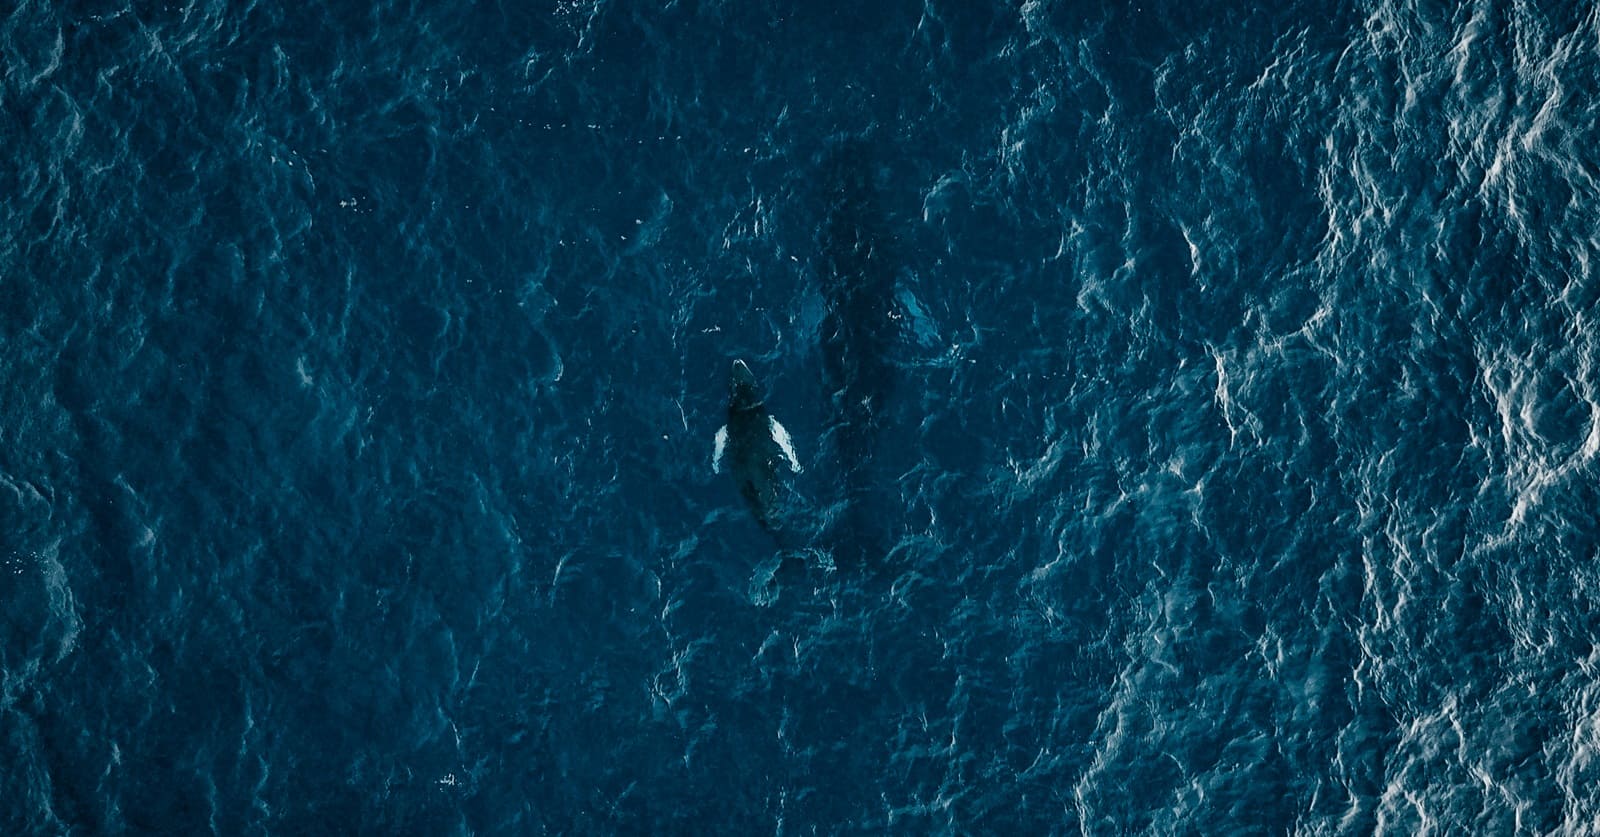 Bering Expedition: Yachts. Science. Whales.